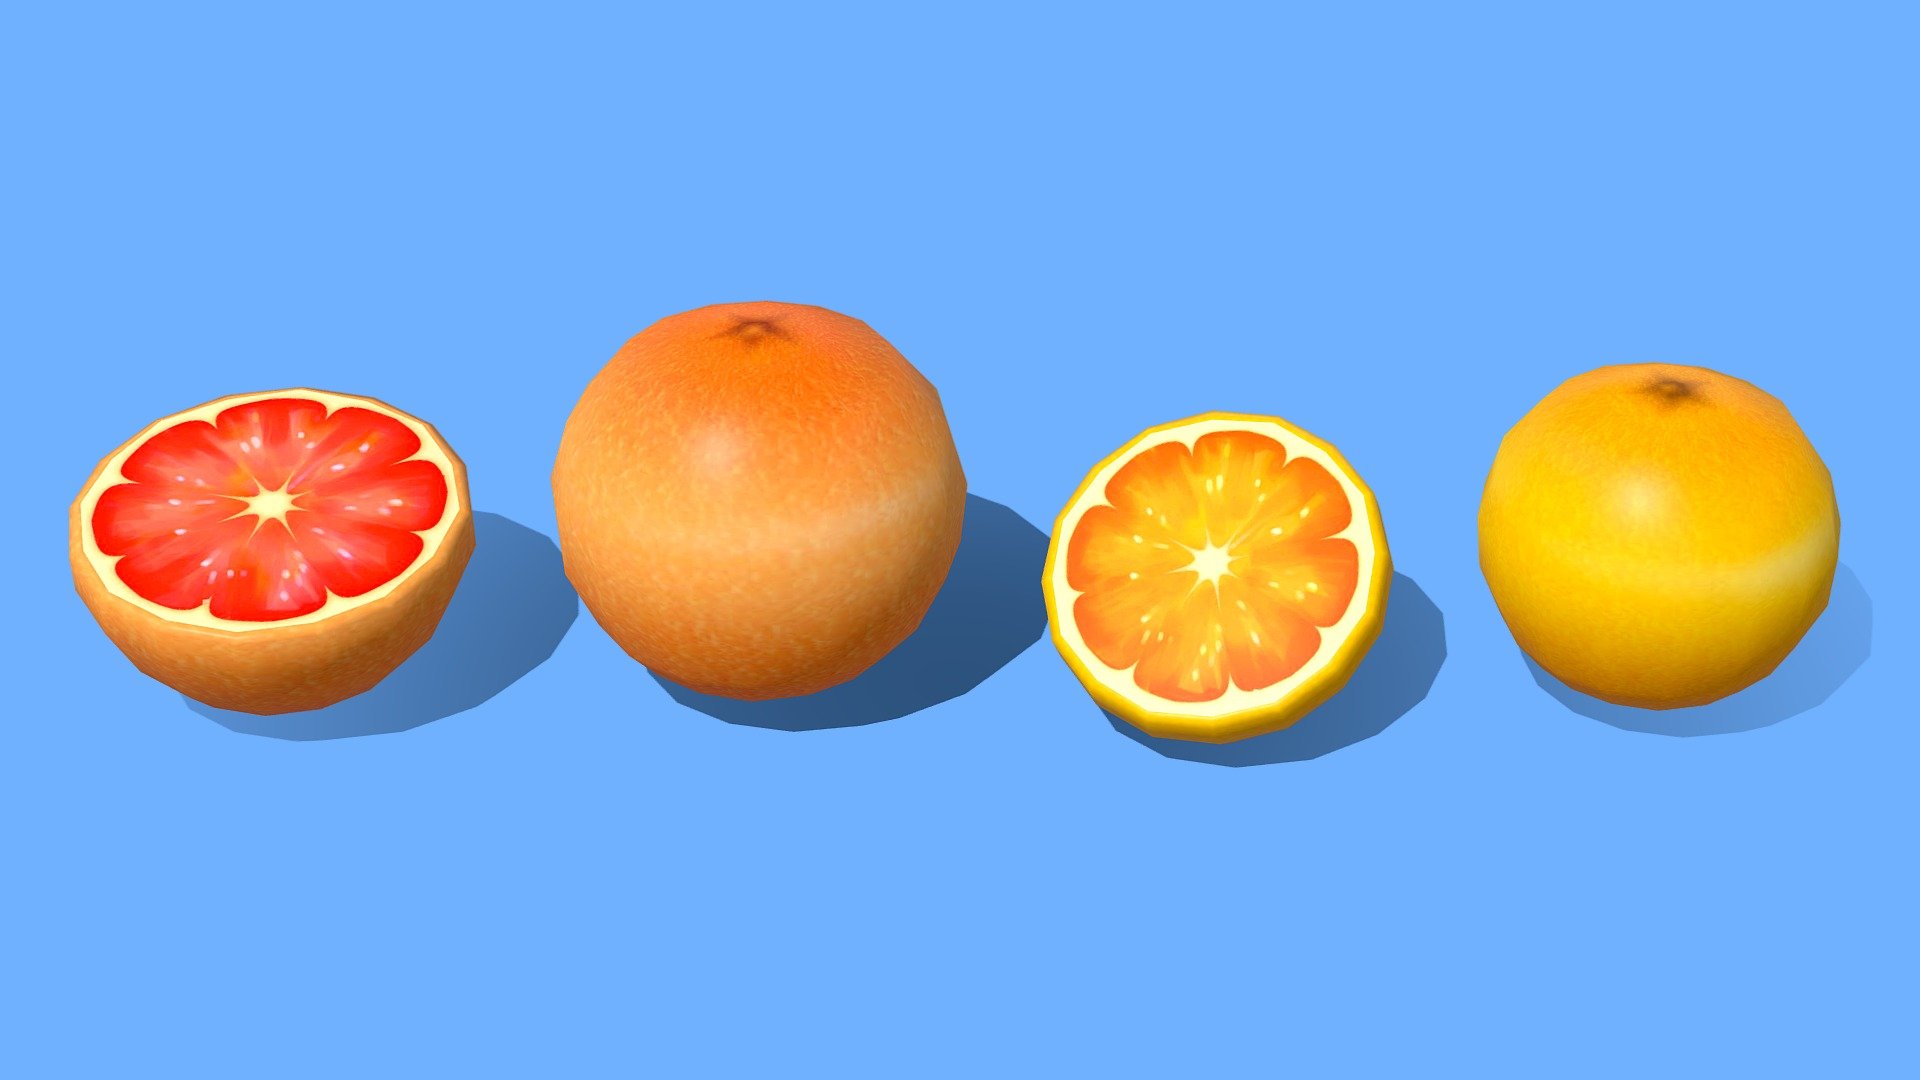 Juicy, perfectly ripe citrus fruit for your next game!




Includes whole orange, orange half, whole grapefruit and grapefruit half

This asset uses a single 1024x1024 diffuse texture map and can be used both lit and unlit - perfect for mobile! This asset also includes a roughness map for the shiny skin/centres. 

Modeled in Maya and painted in Photoshop.

While you’re here make sure to check out my other assets! Every asset is modeled and painted in the same style so your game or project will maintain a cohesive and unique style with a wide variety of assets to choose from! - Orange and Grapefruit - Buy Royalty Free 3D model by Megan Alcock (@citystreetlight) 3d model